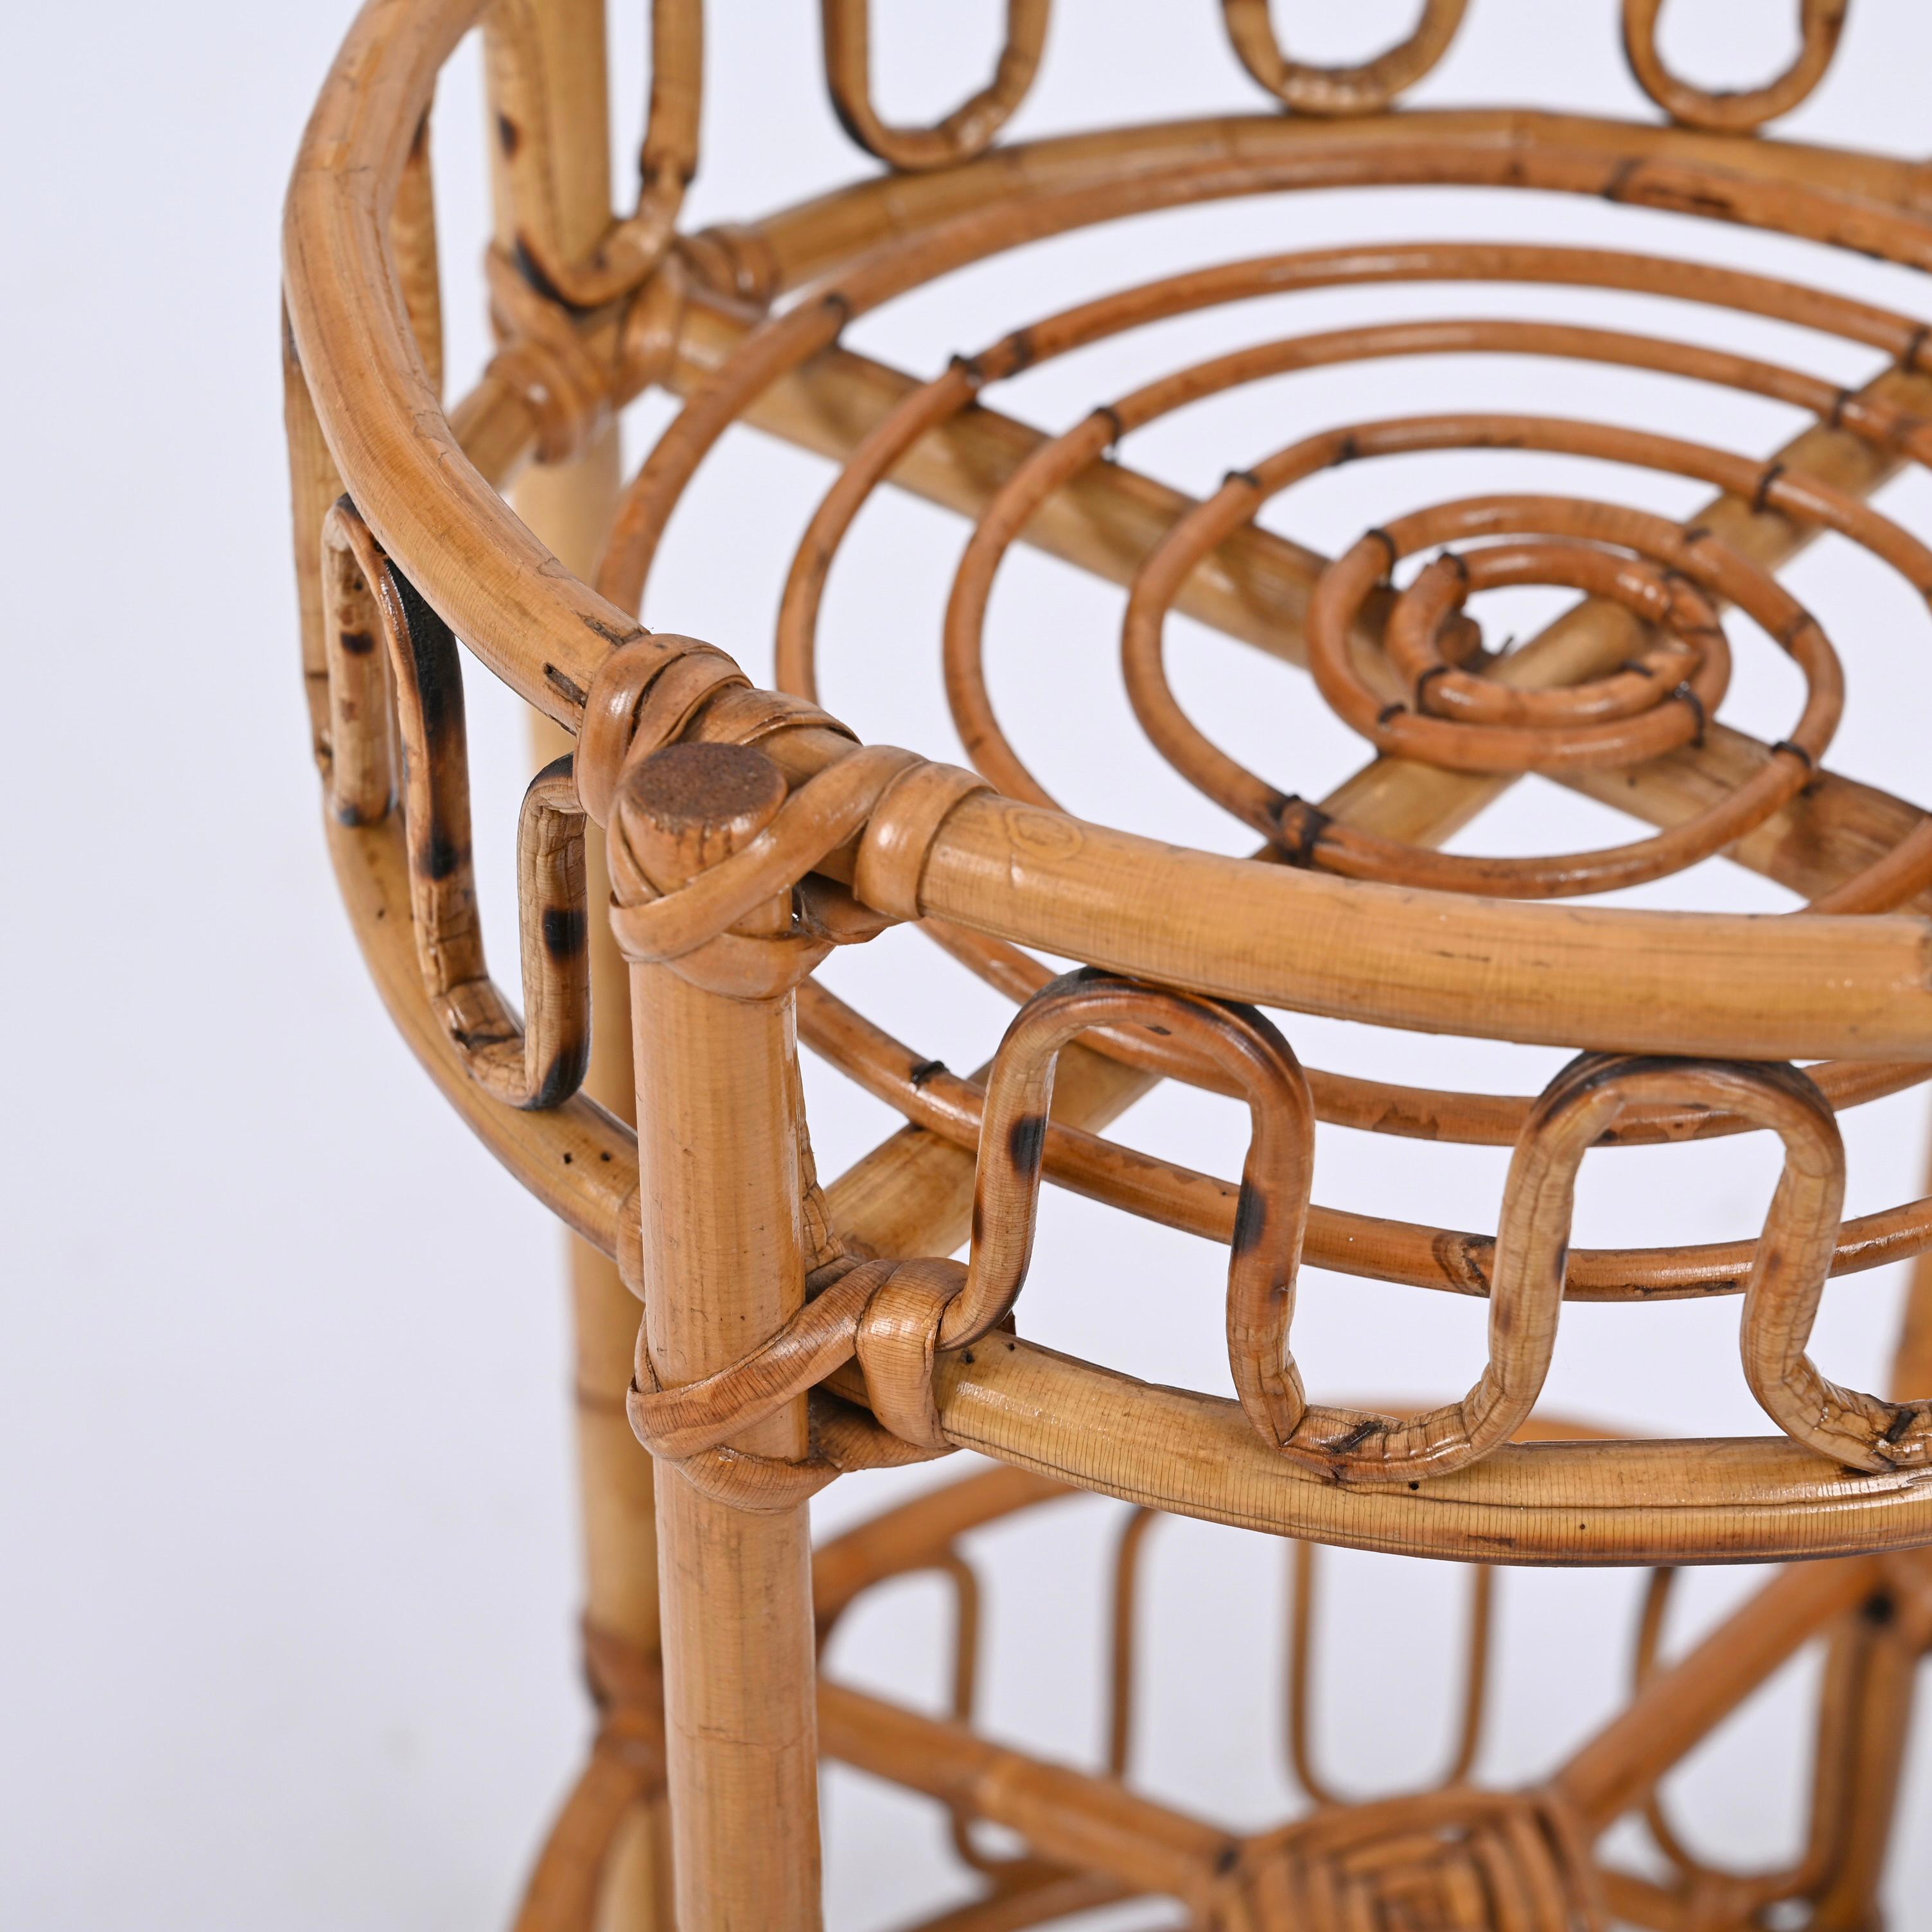 French Riviera Round Service Table with Bamboo and Rattan Bottle Holder, 1960s For Sale 2